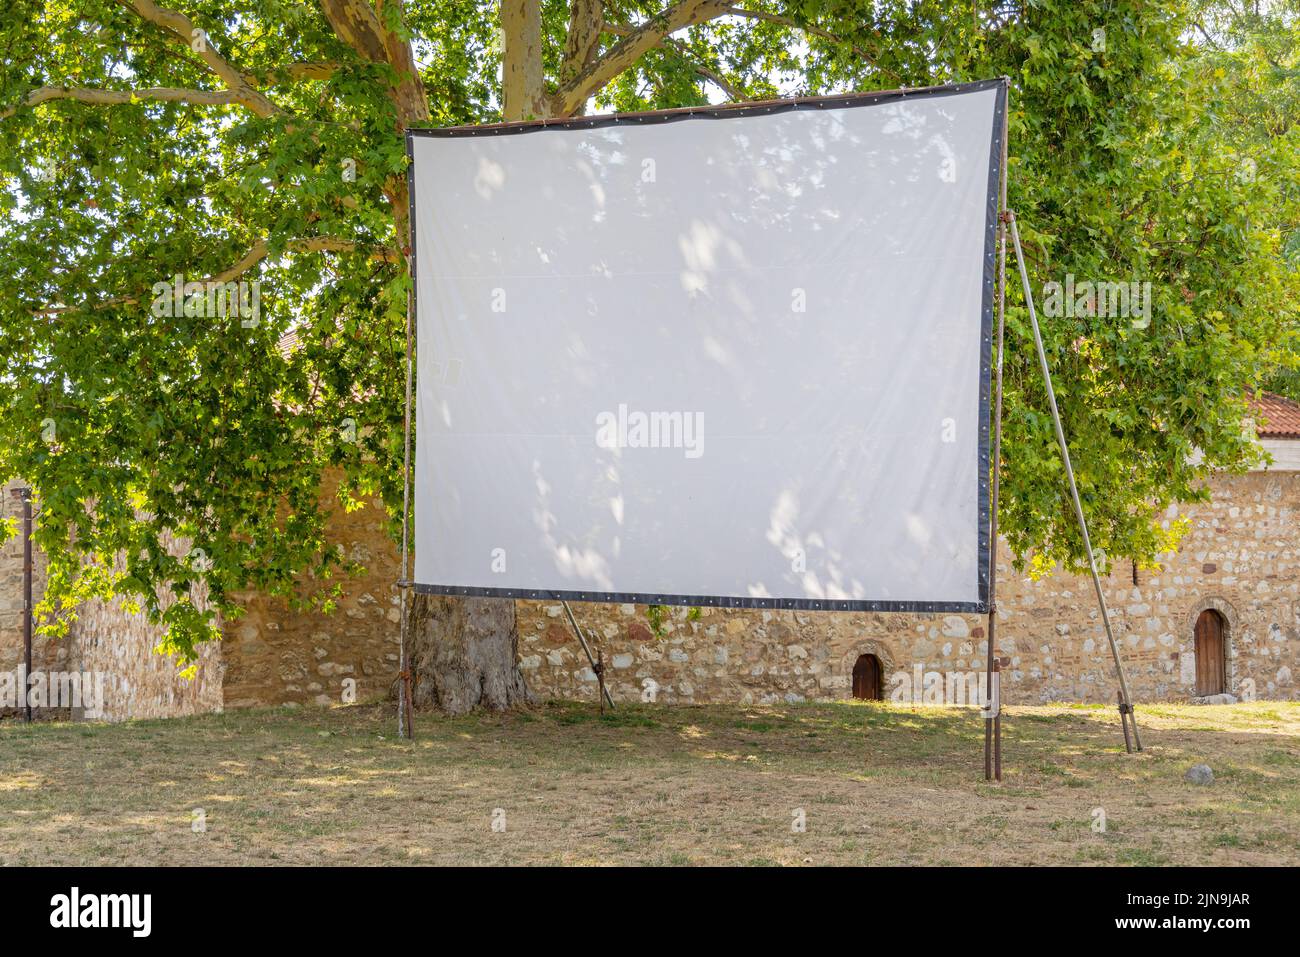 Projector Canvas Screen in Shade Woods Summer Day Copy Space Stock Photo